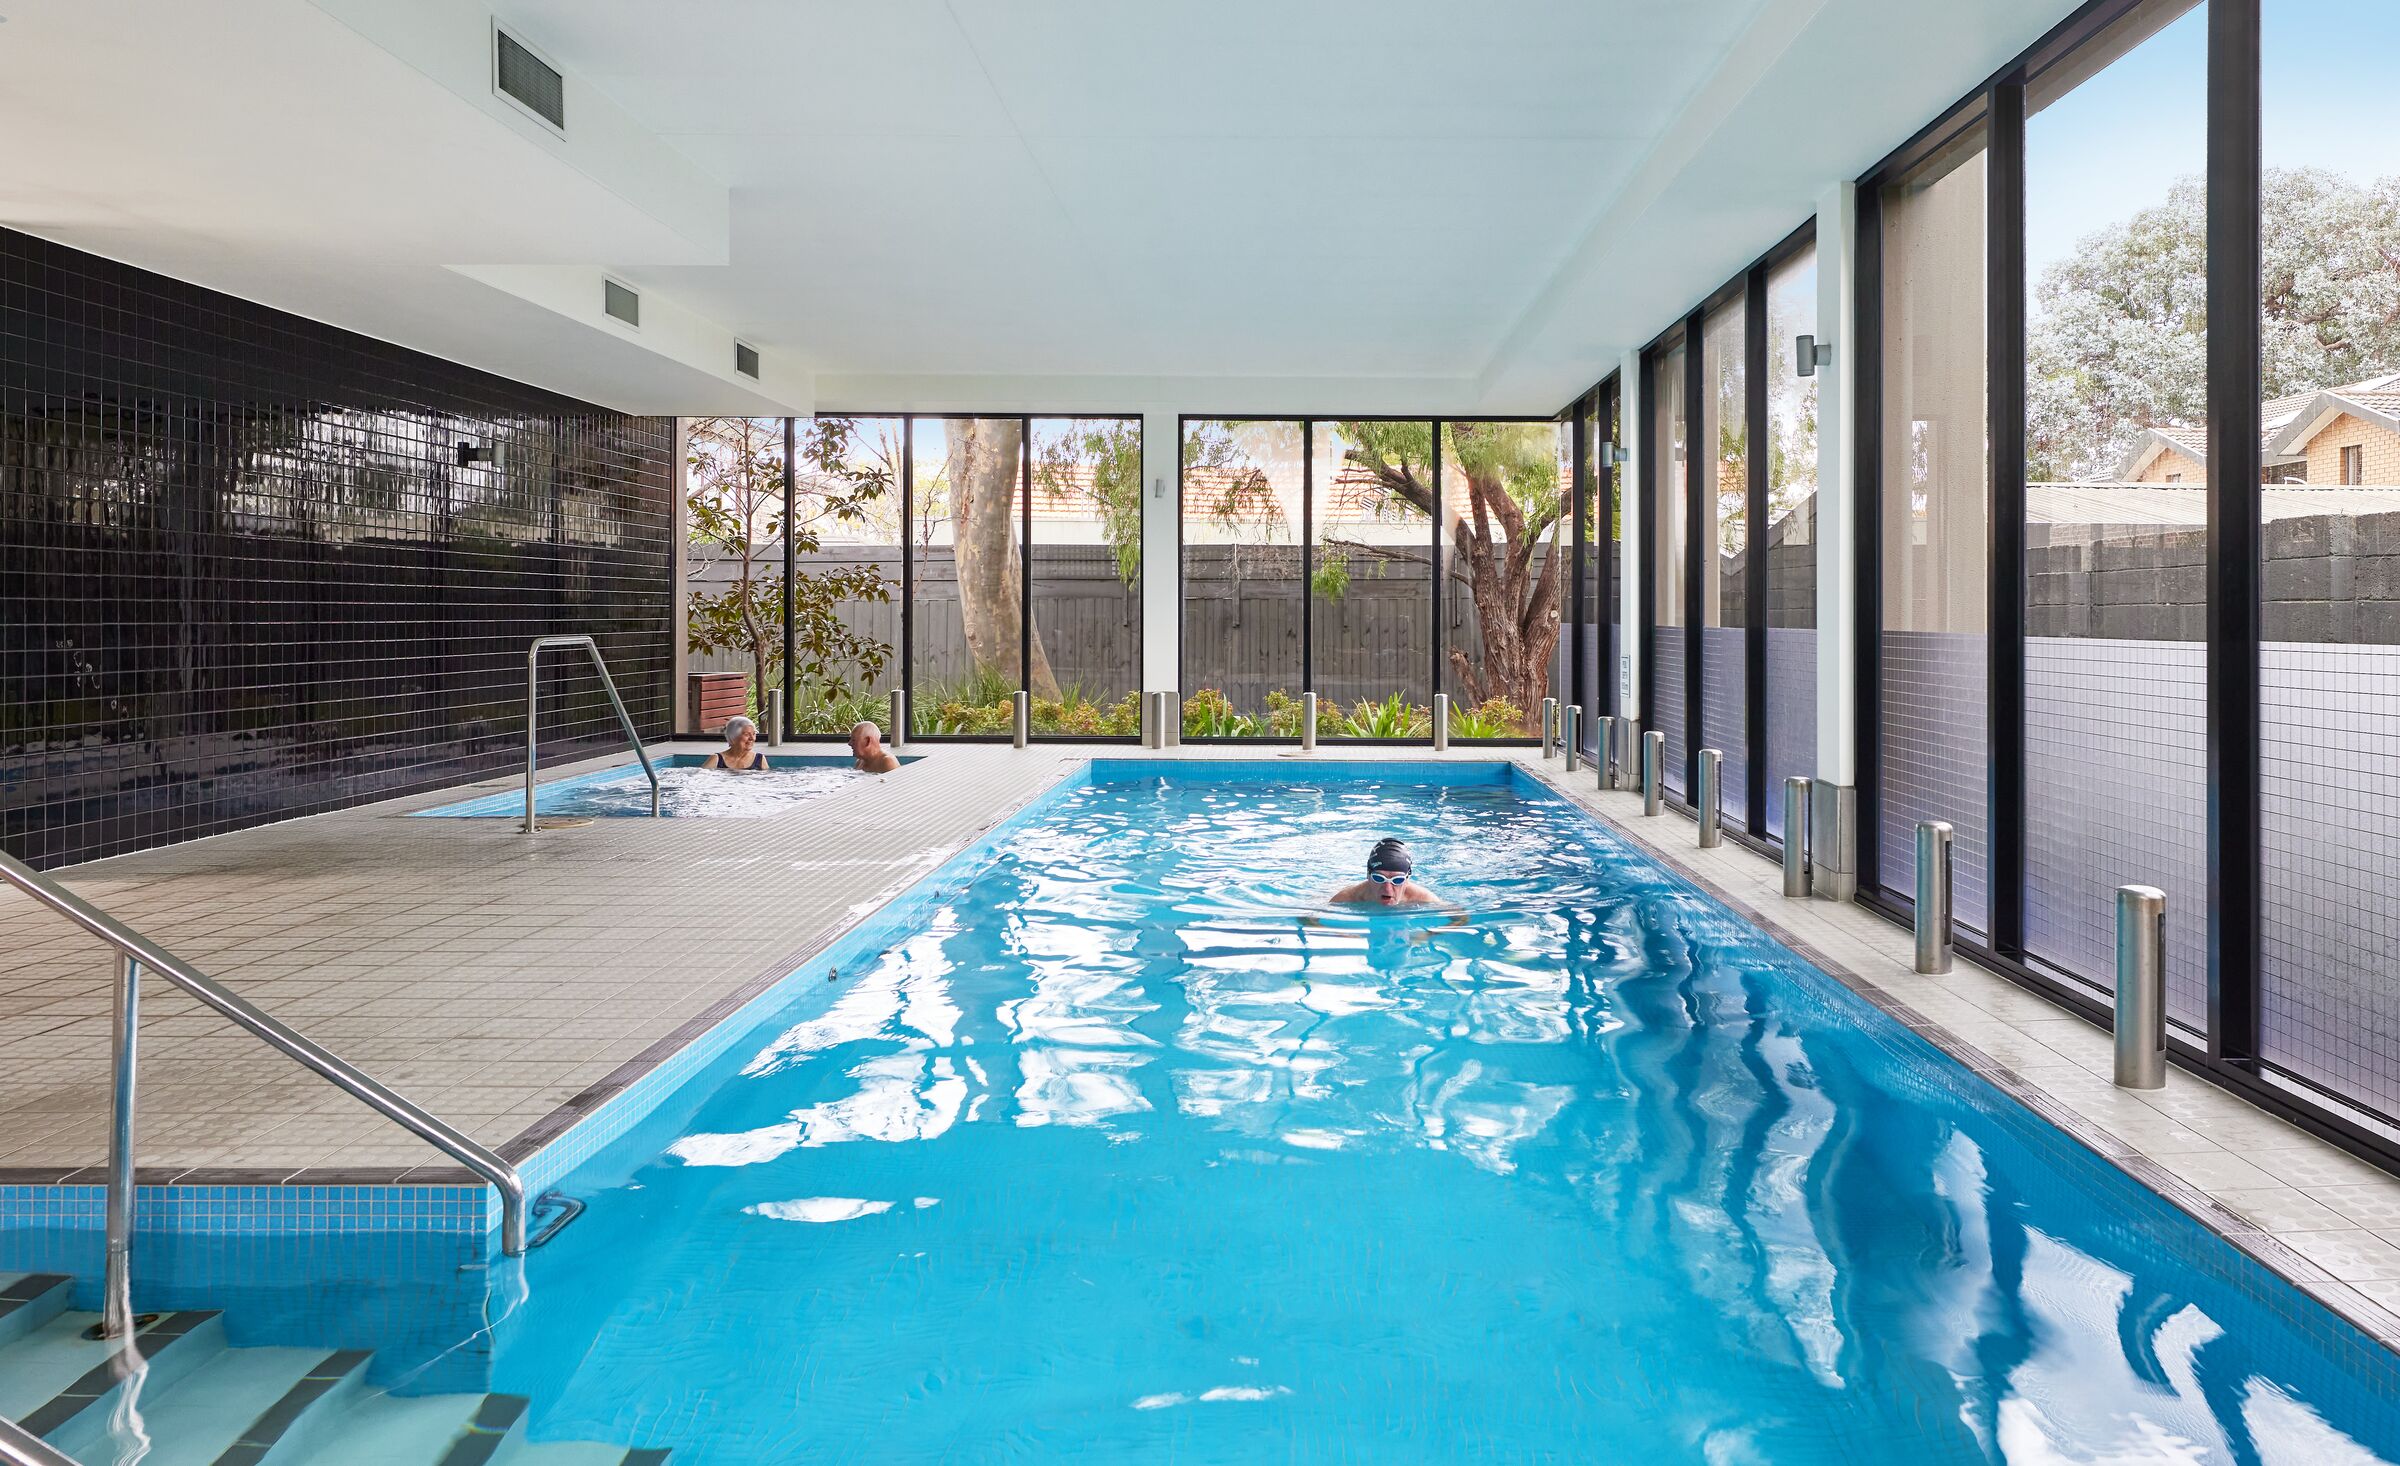 The Brighton on Bay good sized indoor swimming pool and spa in light and airy room